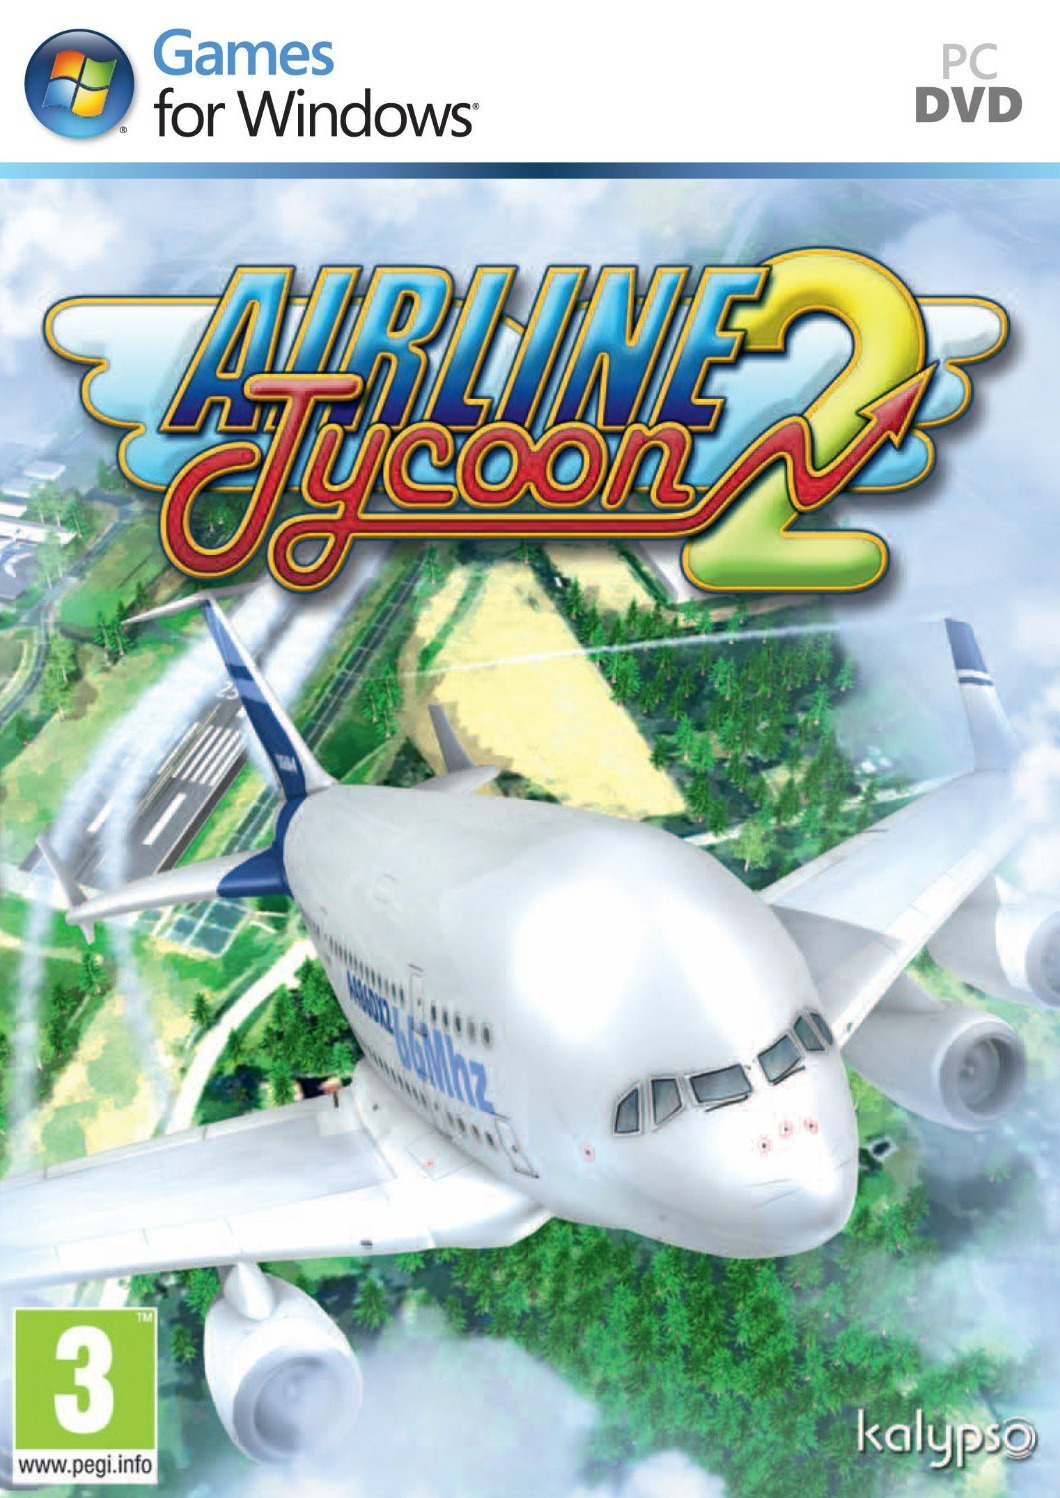 Airline Tycoon II [Multilangue|PC] [FS|US] Jaquette-airline-tycoon-ii-pc-cover-avant-g-1316772743